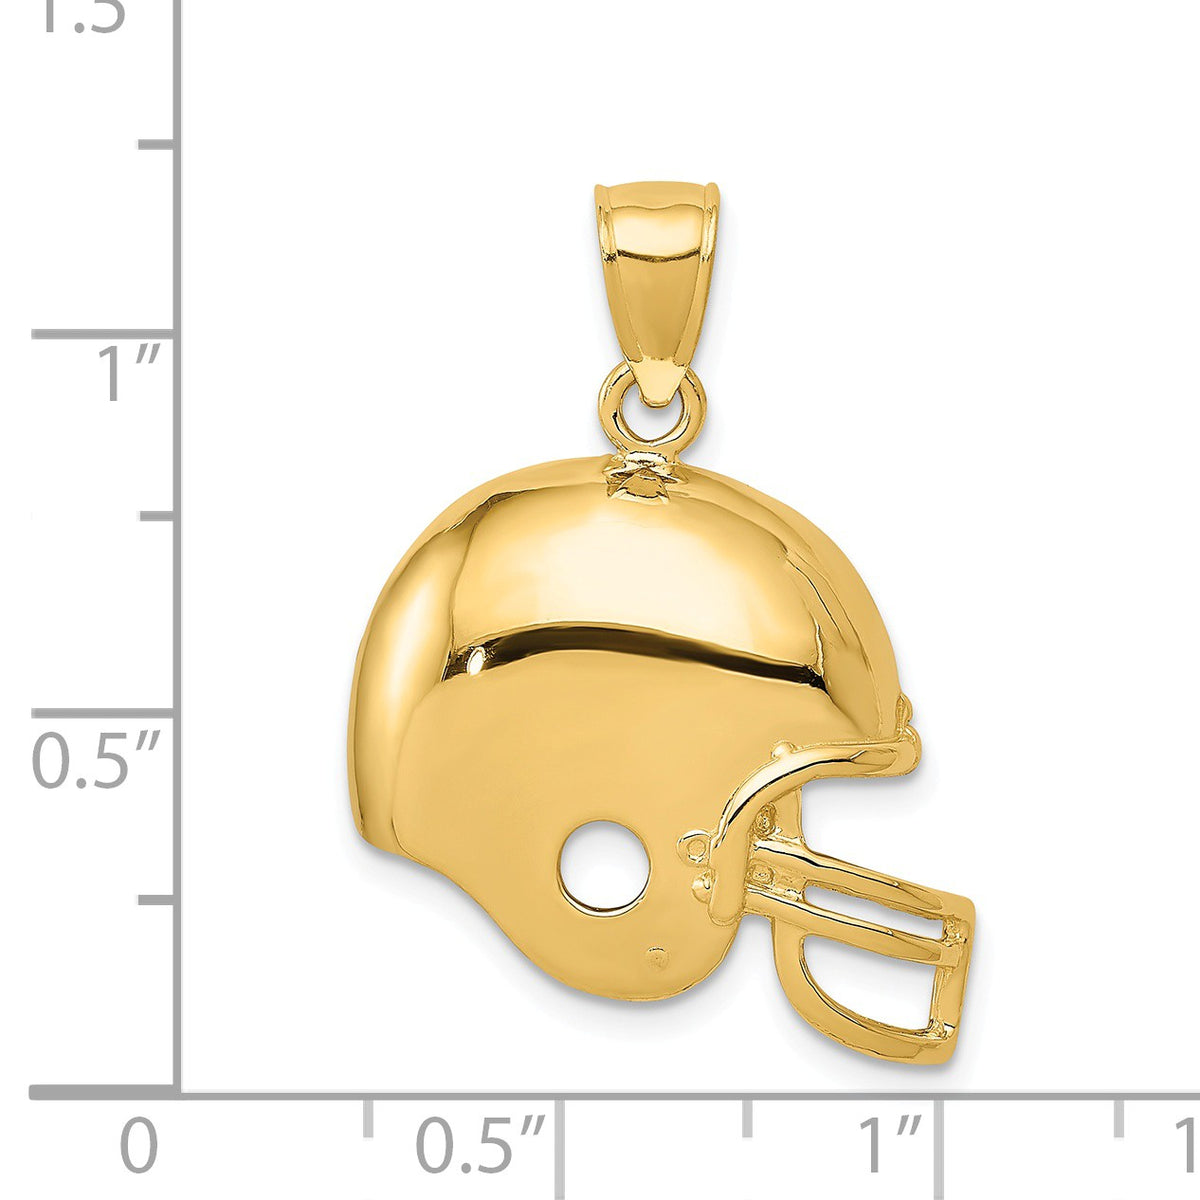 Alternate view of the 14k Yellow Gold Polished Football Helmet Pendant, 22mm by The Black Bow Jewelry Co.